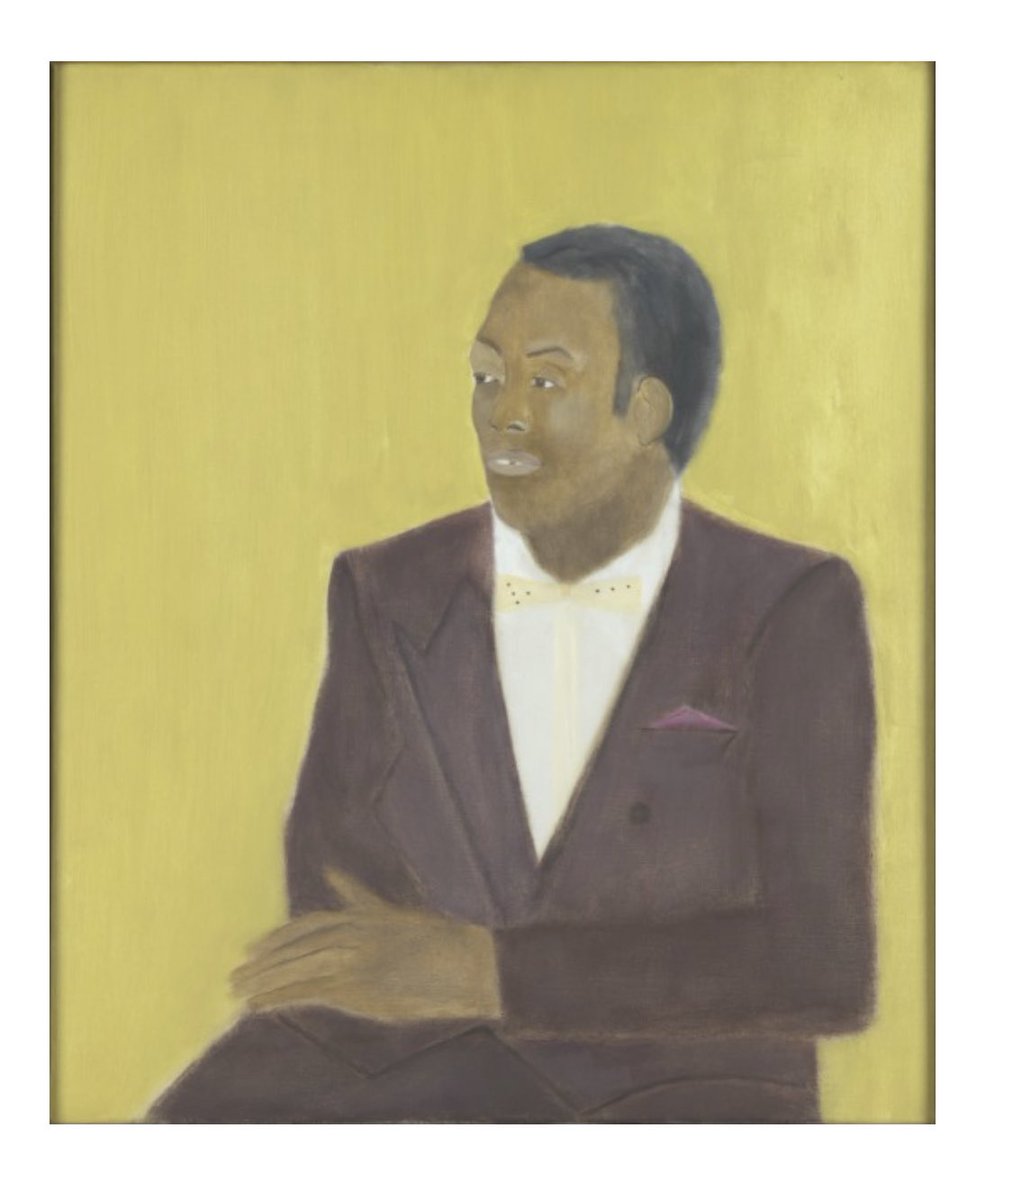 2/6 this is a particularly interesting one. It’s a portrait of Alton Peters by Craigie Aitchison.  https://artcollection.culture.gov.uk/artwork/16372-c/ picking a portrait of a black man is a smart signal about diversity but there’s more to it...